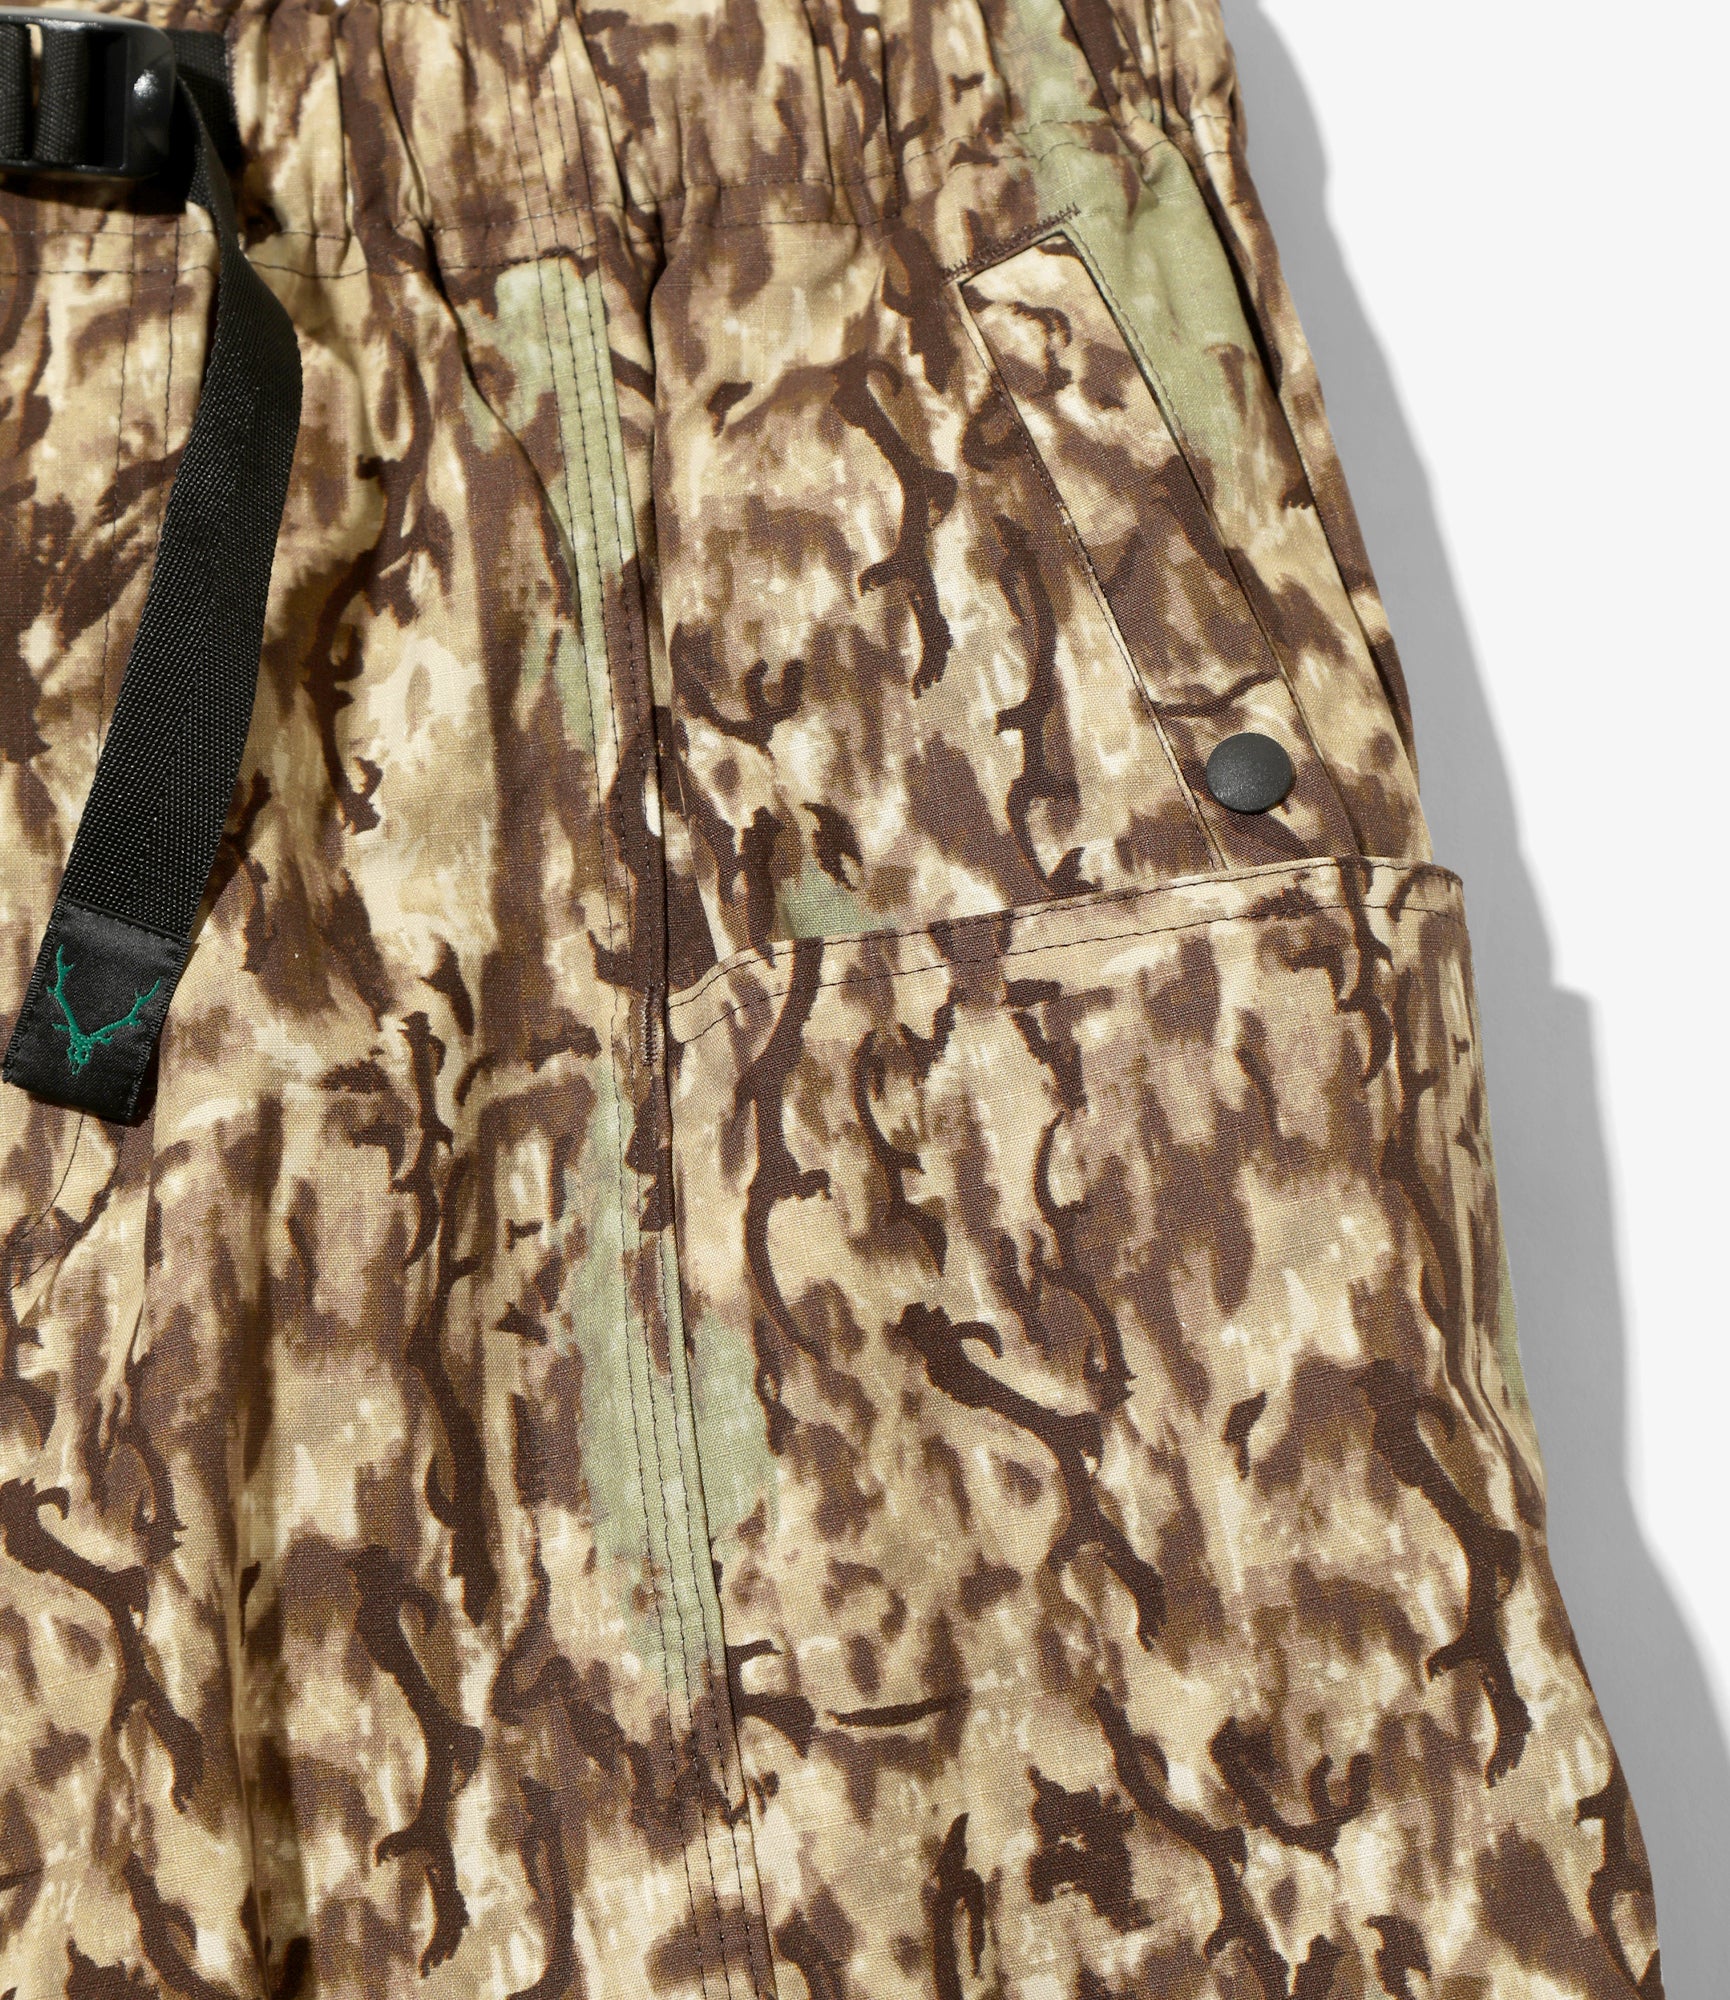 Belted C.S. Pant - Horn Camo - Cotton Ripstop / Printed